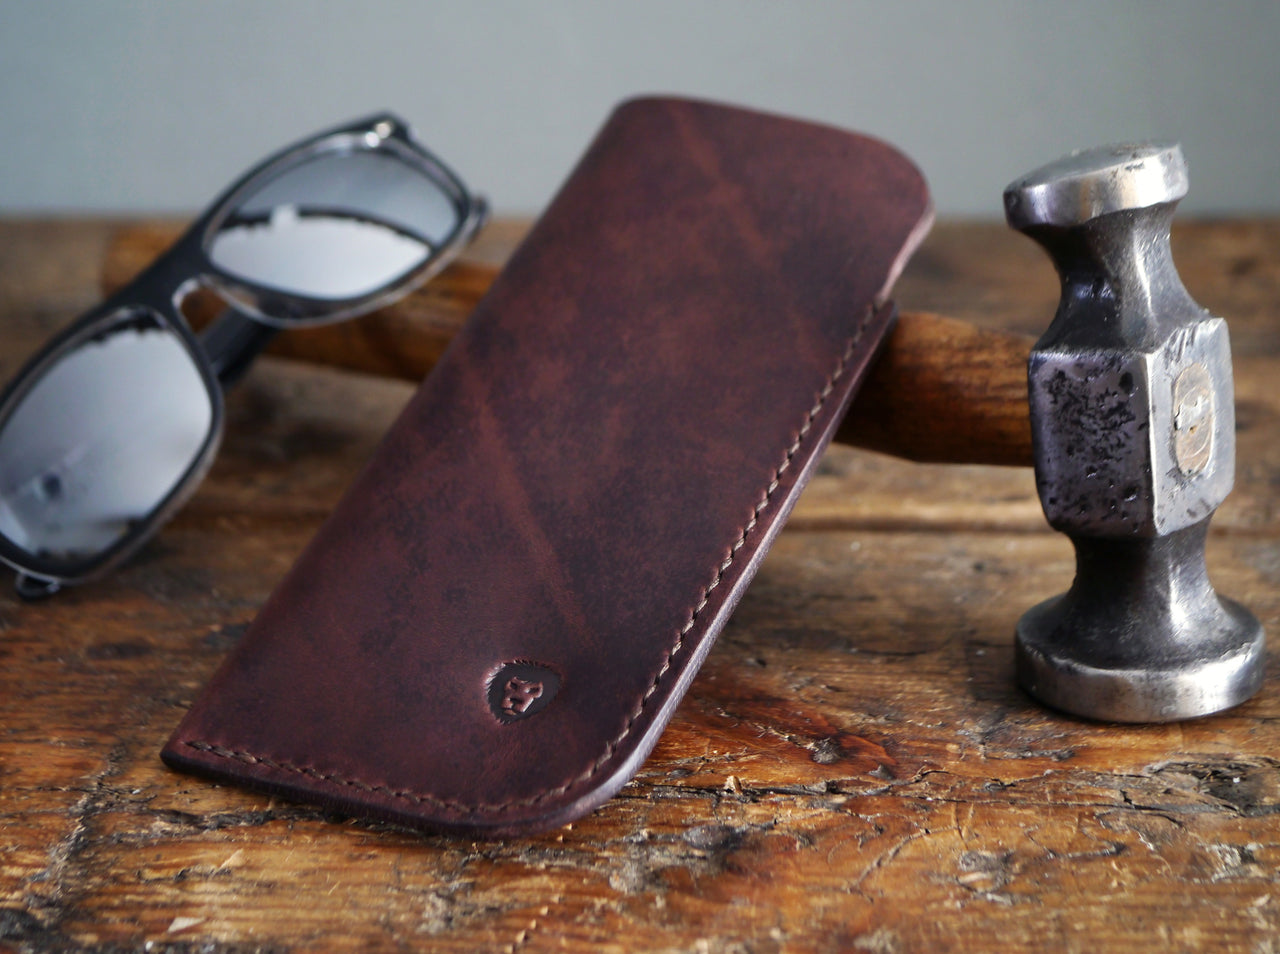 leather sunglasses pouch